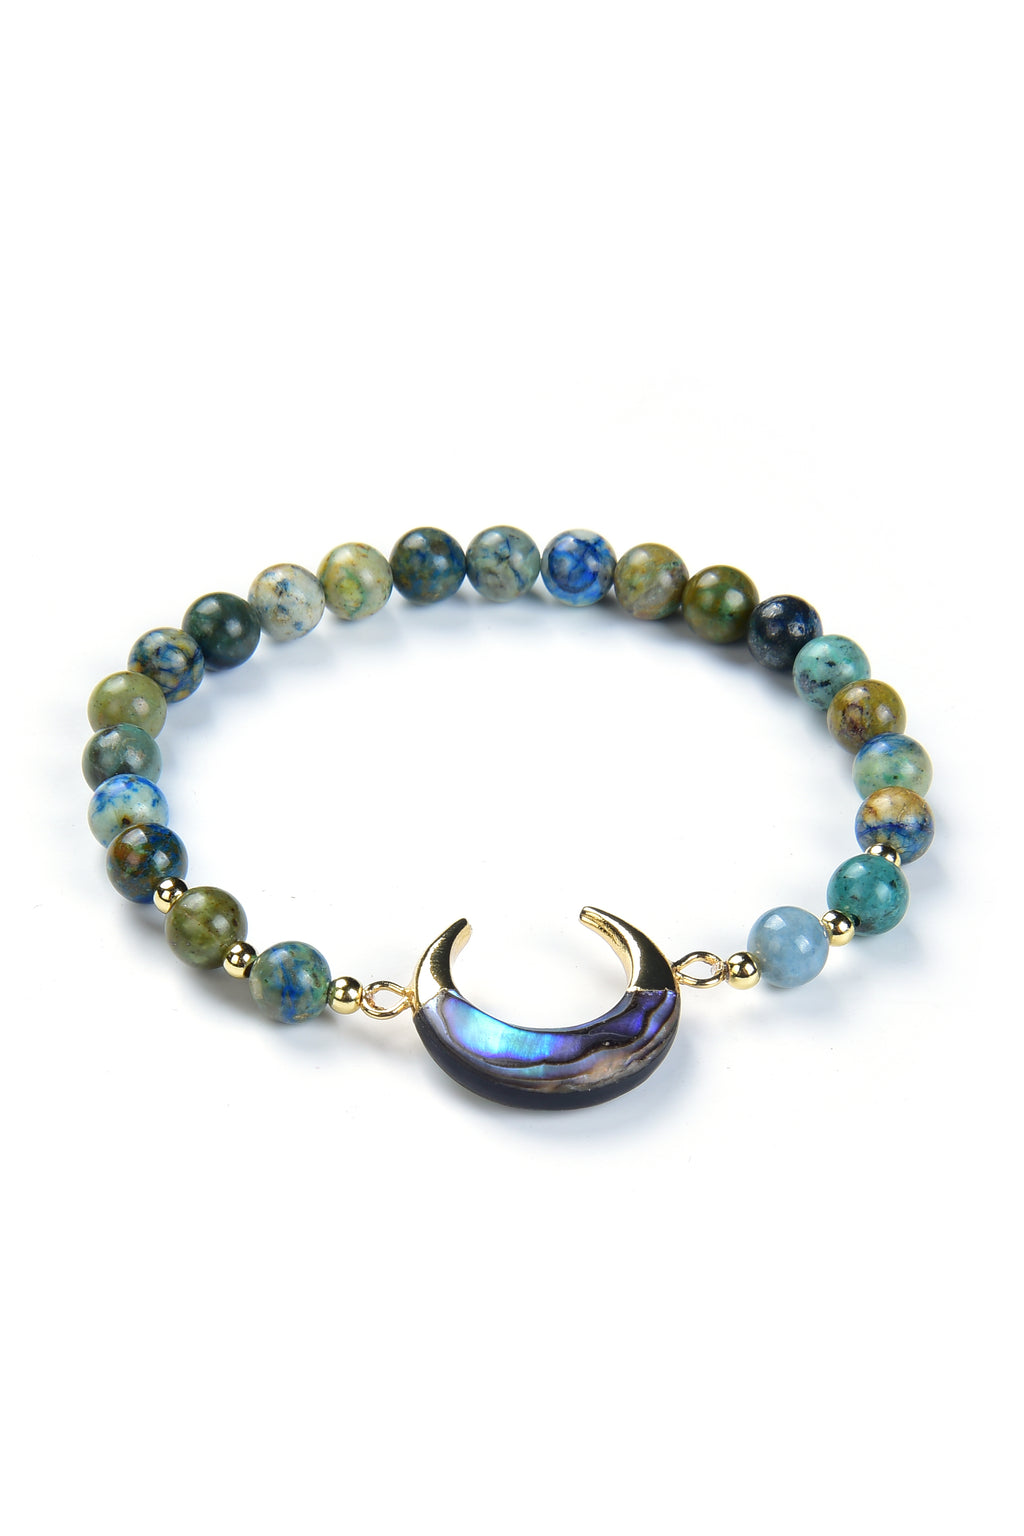 Crescent moon beaded bracelet with chrysocolla beads.